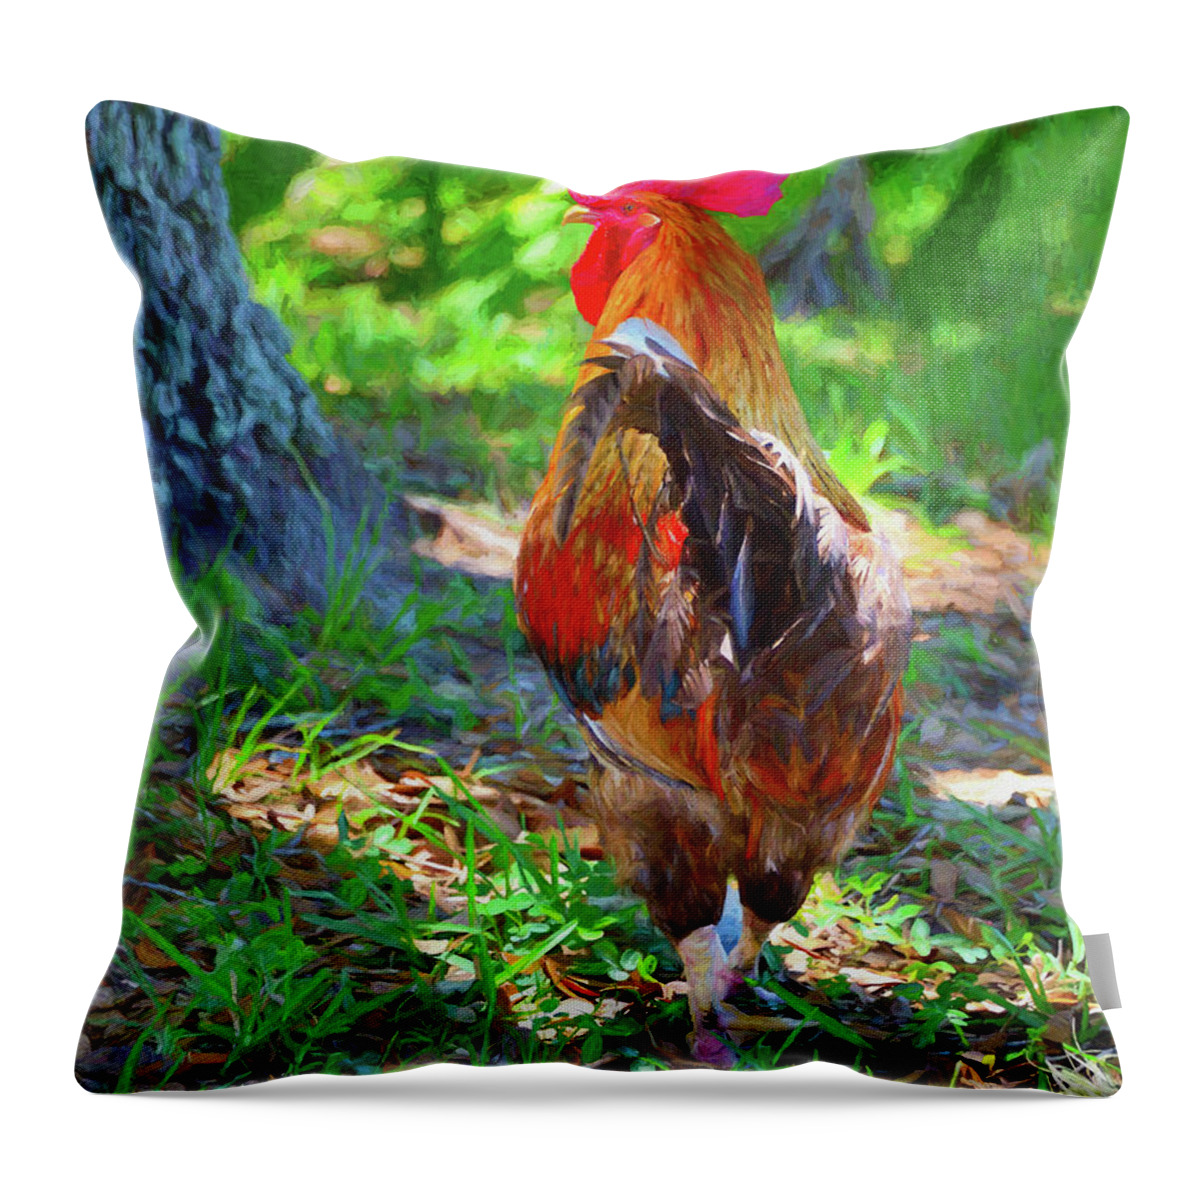 Rooster Throw Pillow featuring the photograph Rooster by Alison Belsan Horton